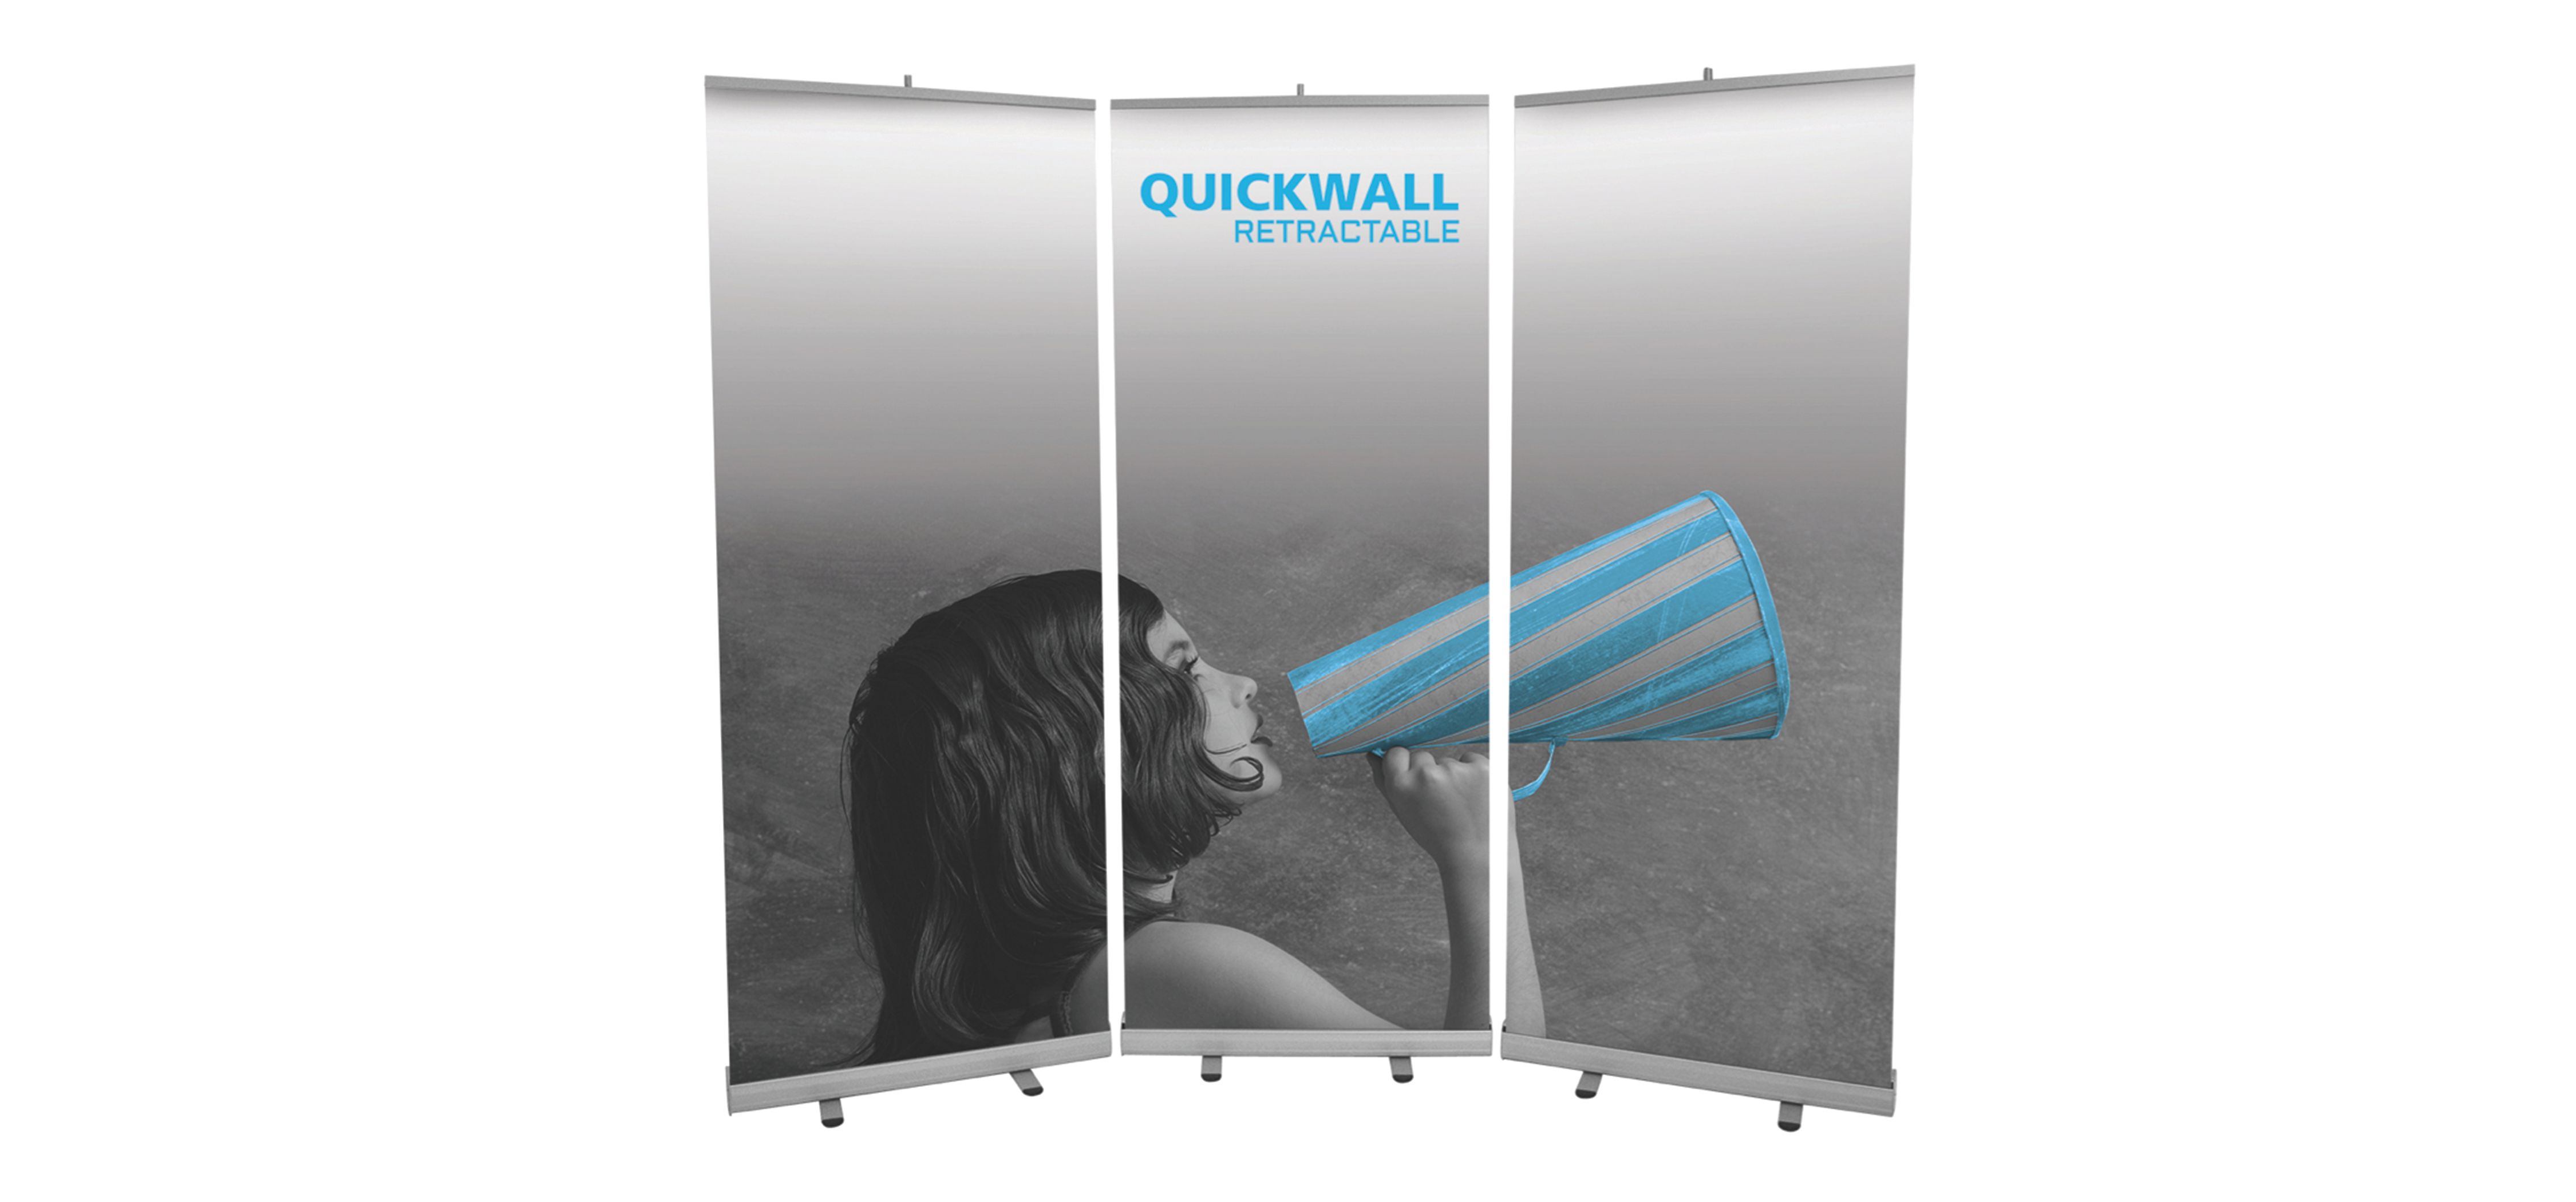 Banners, Displays, & More